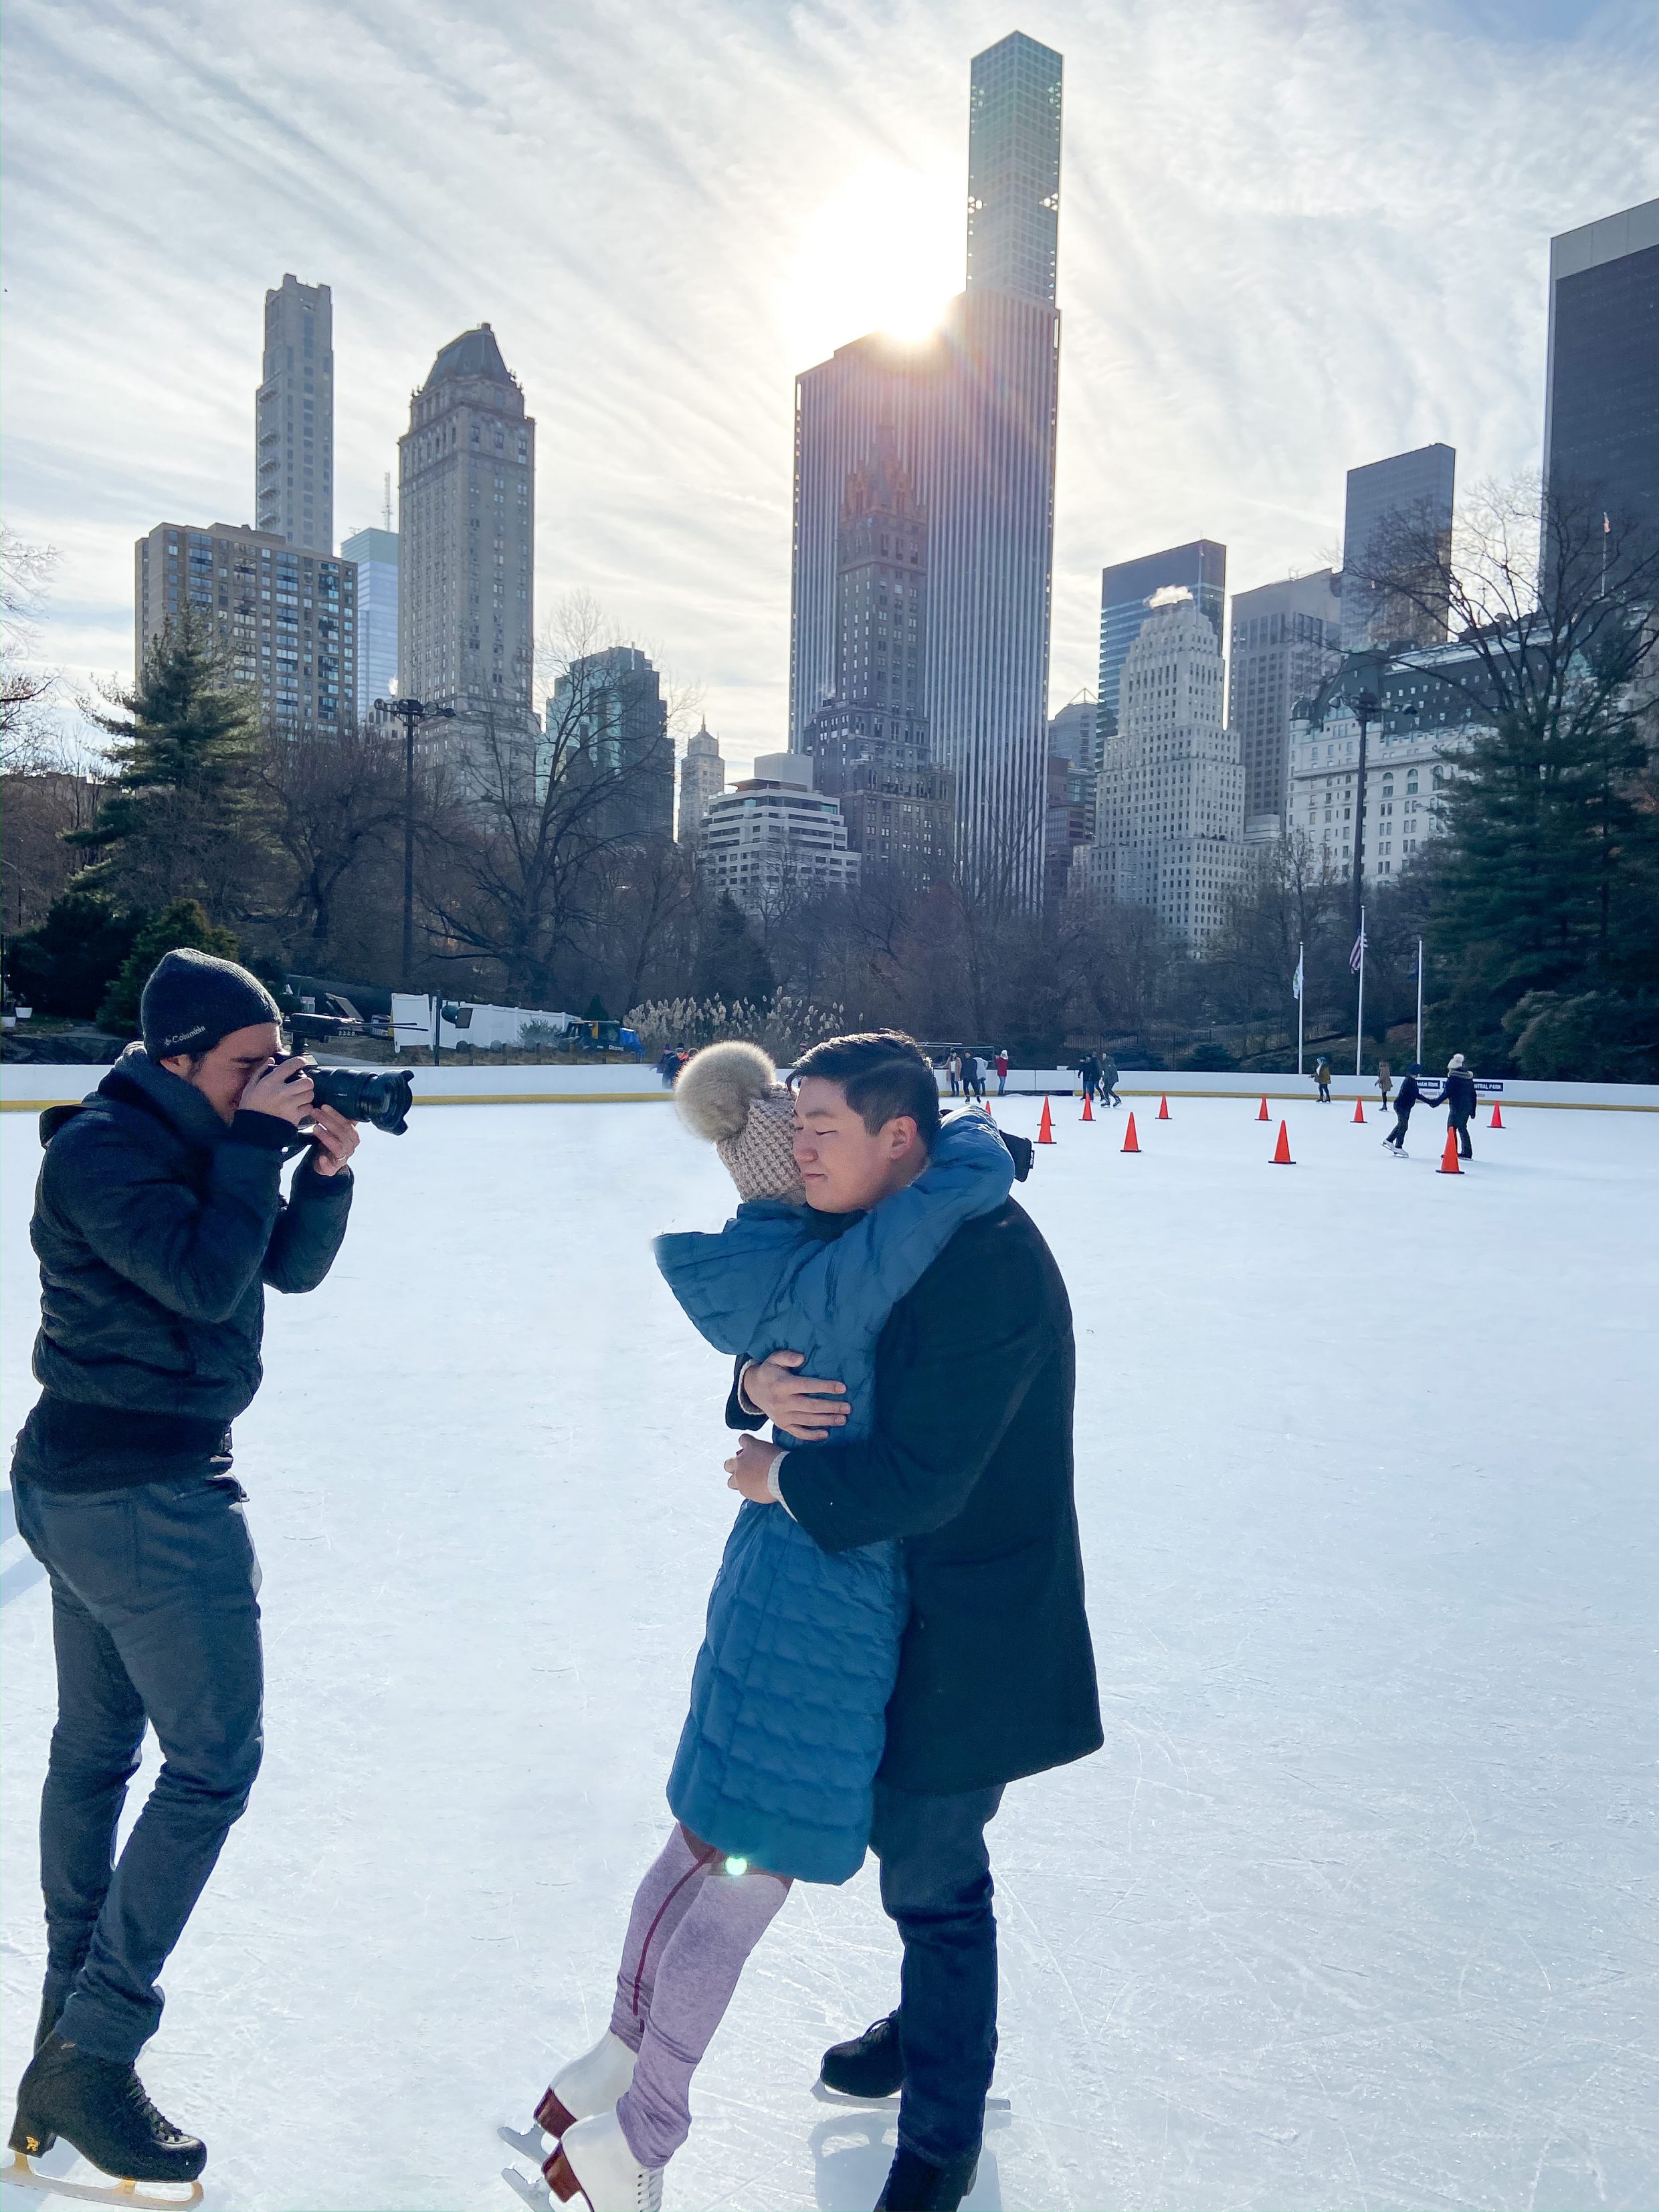 On ice videographer captures emotional surprise proposal while ice skating at central park in new york city